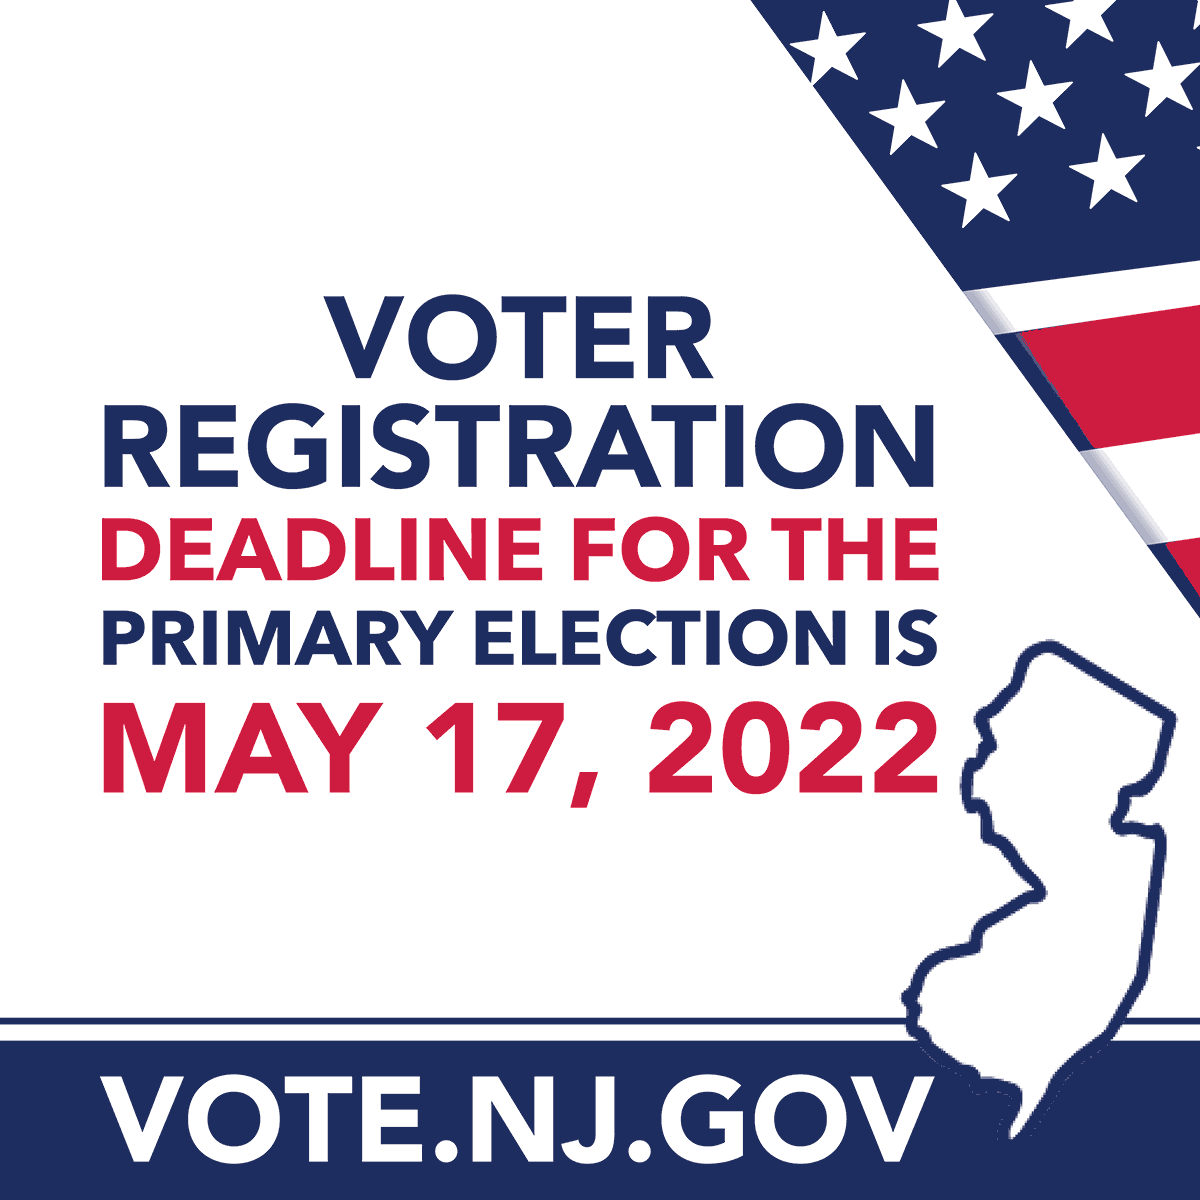 Voter registration deadline for the primary election is May 17, 2022.